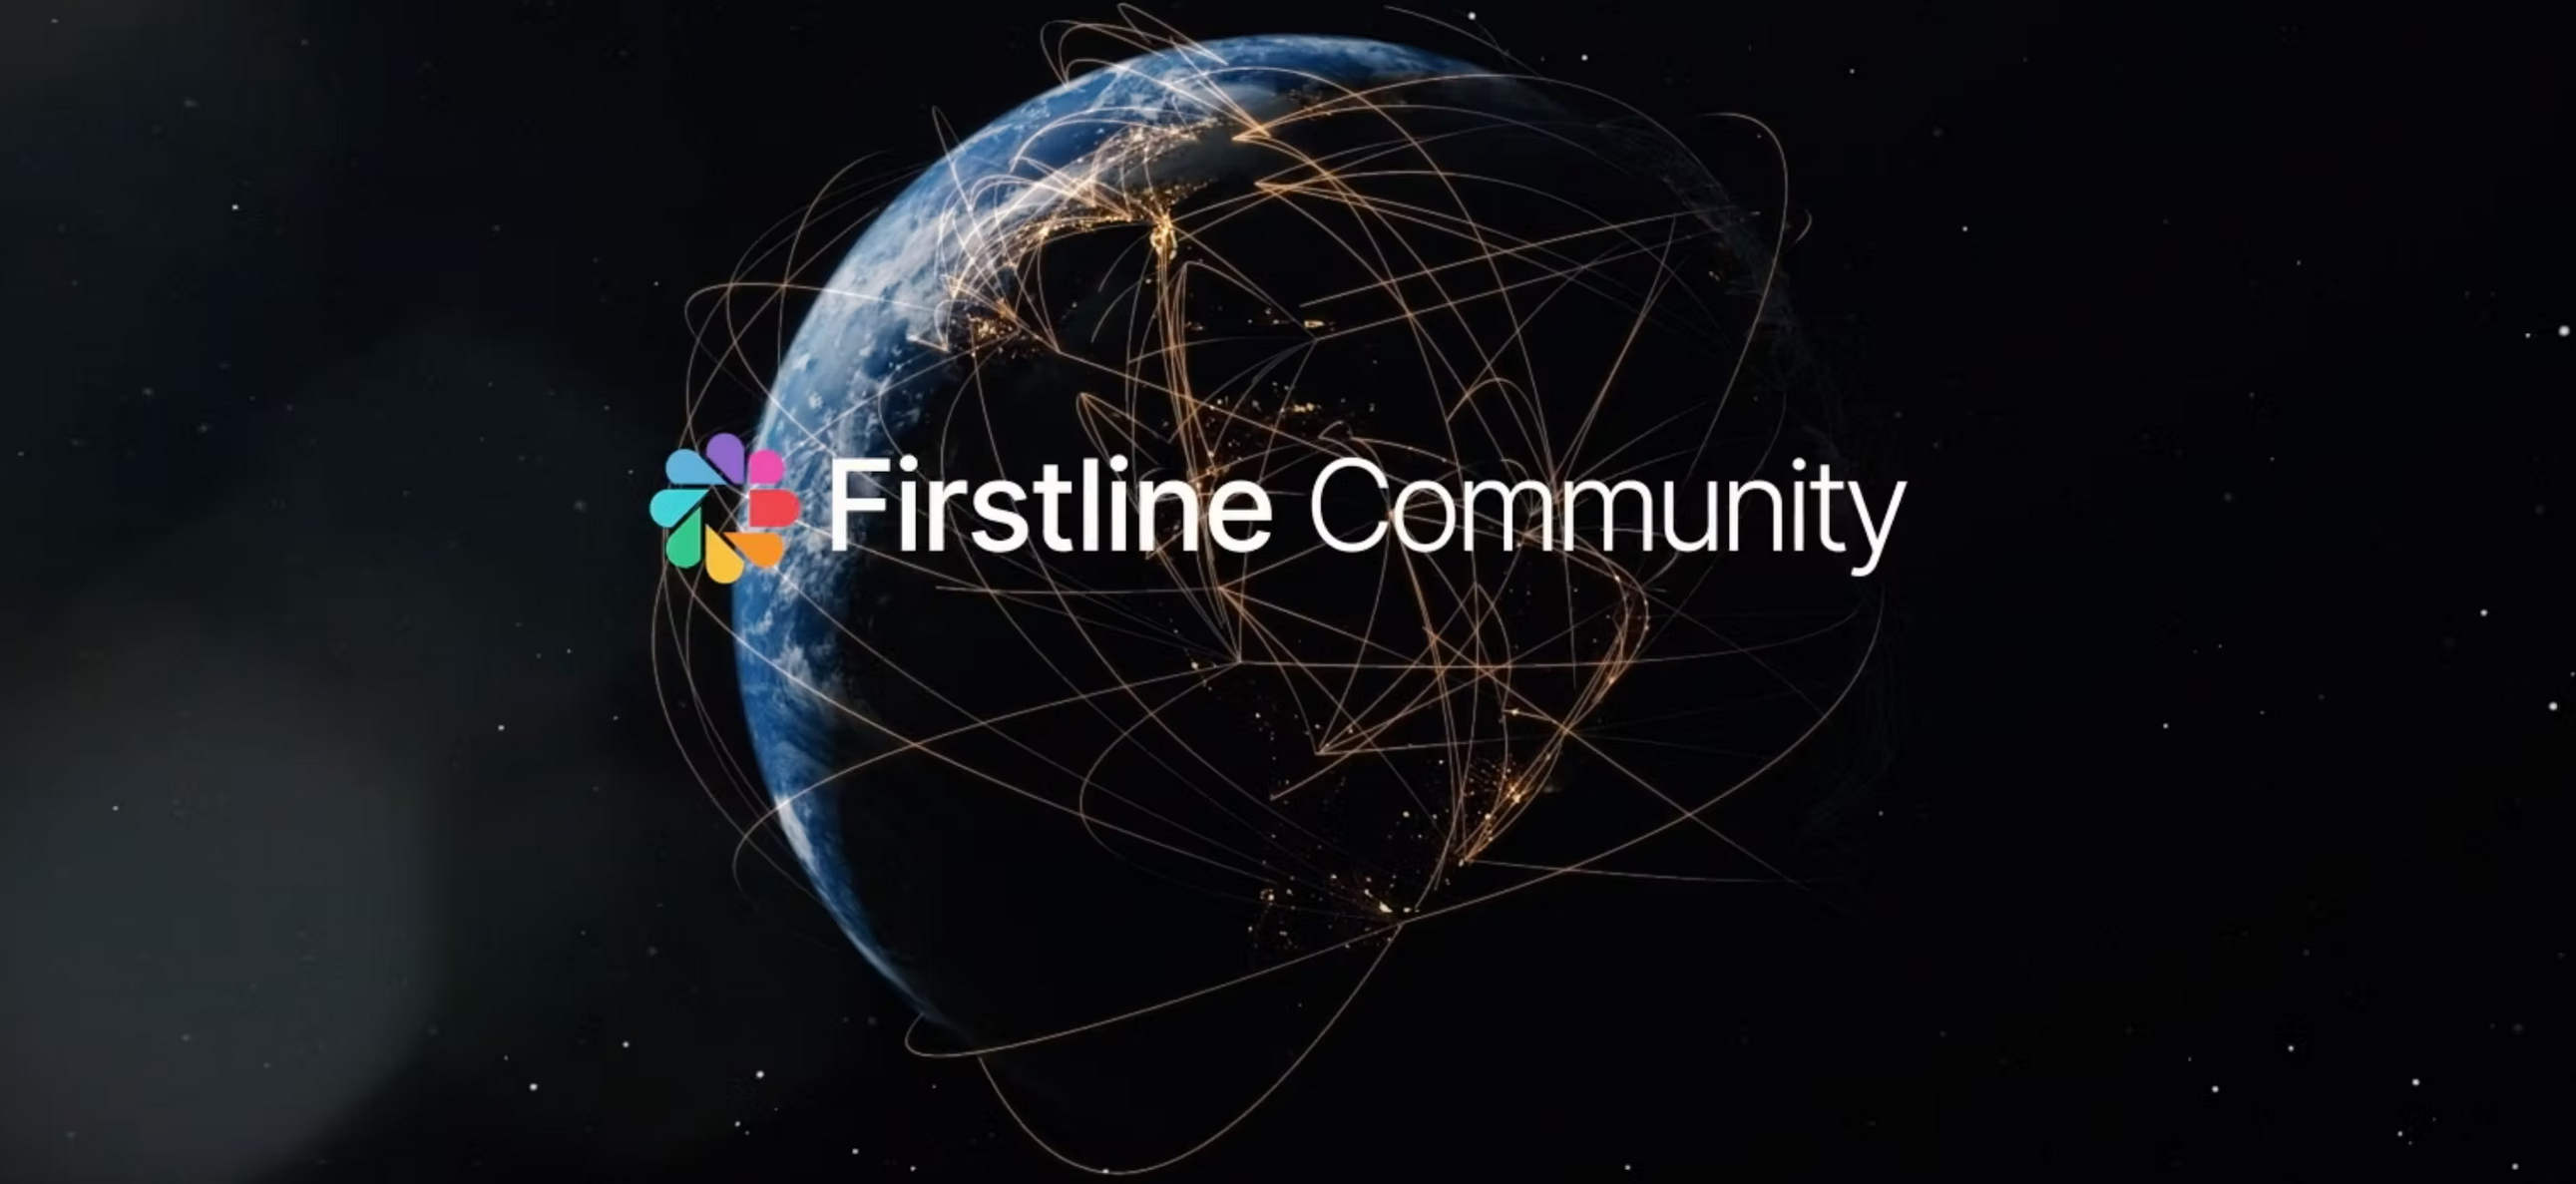 Firstline Community - global knowledge sharing and collaboration